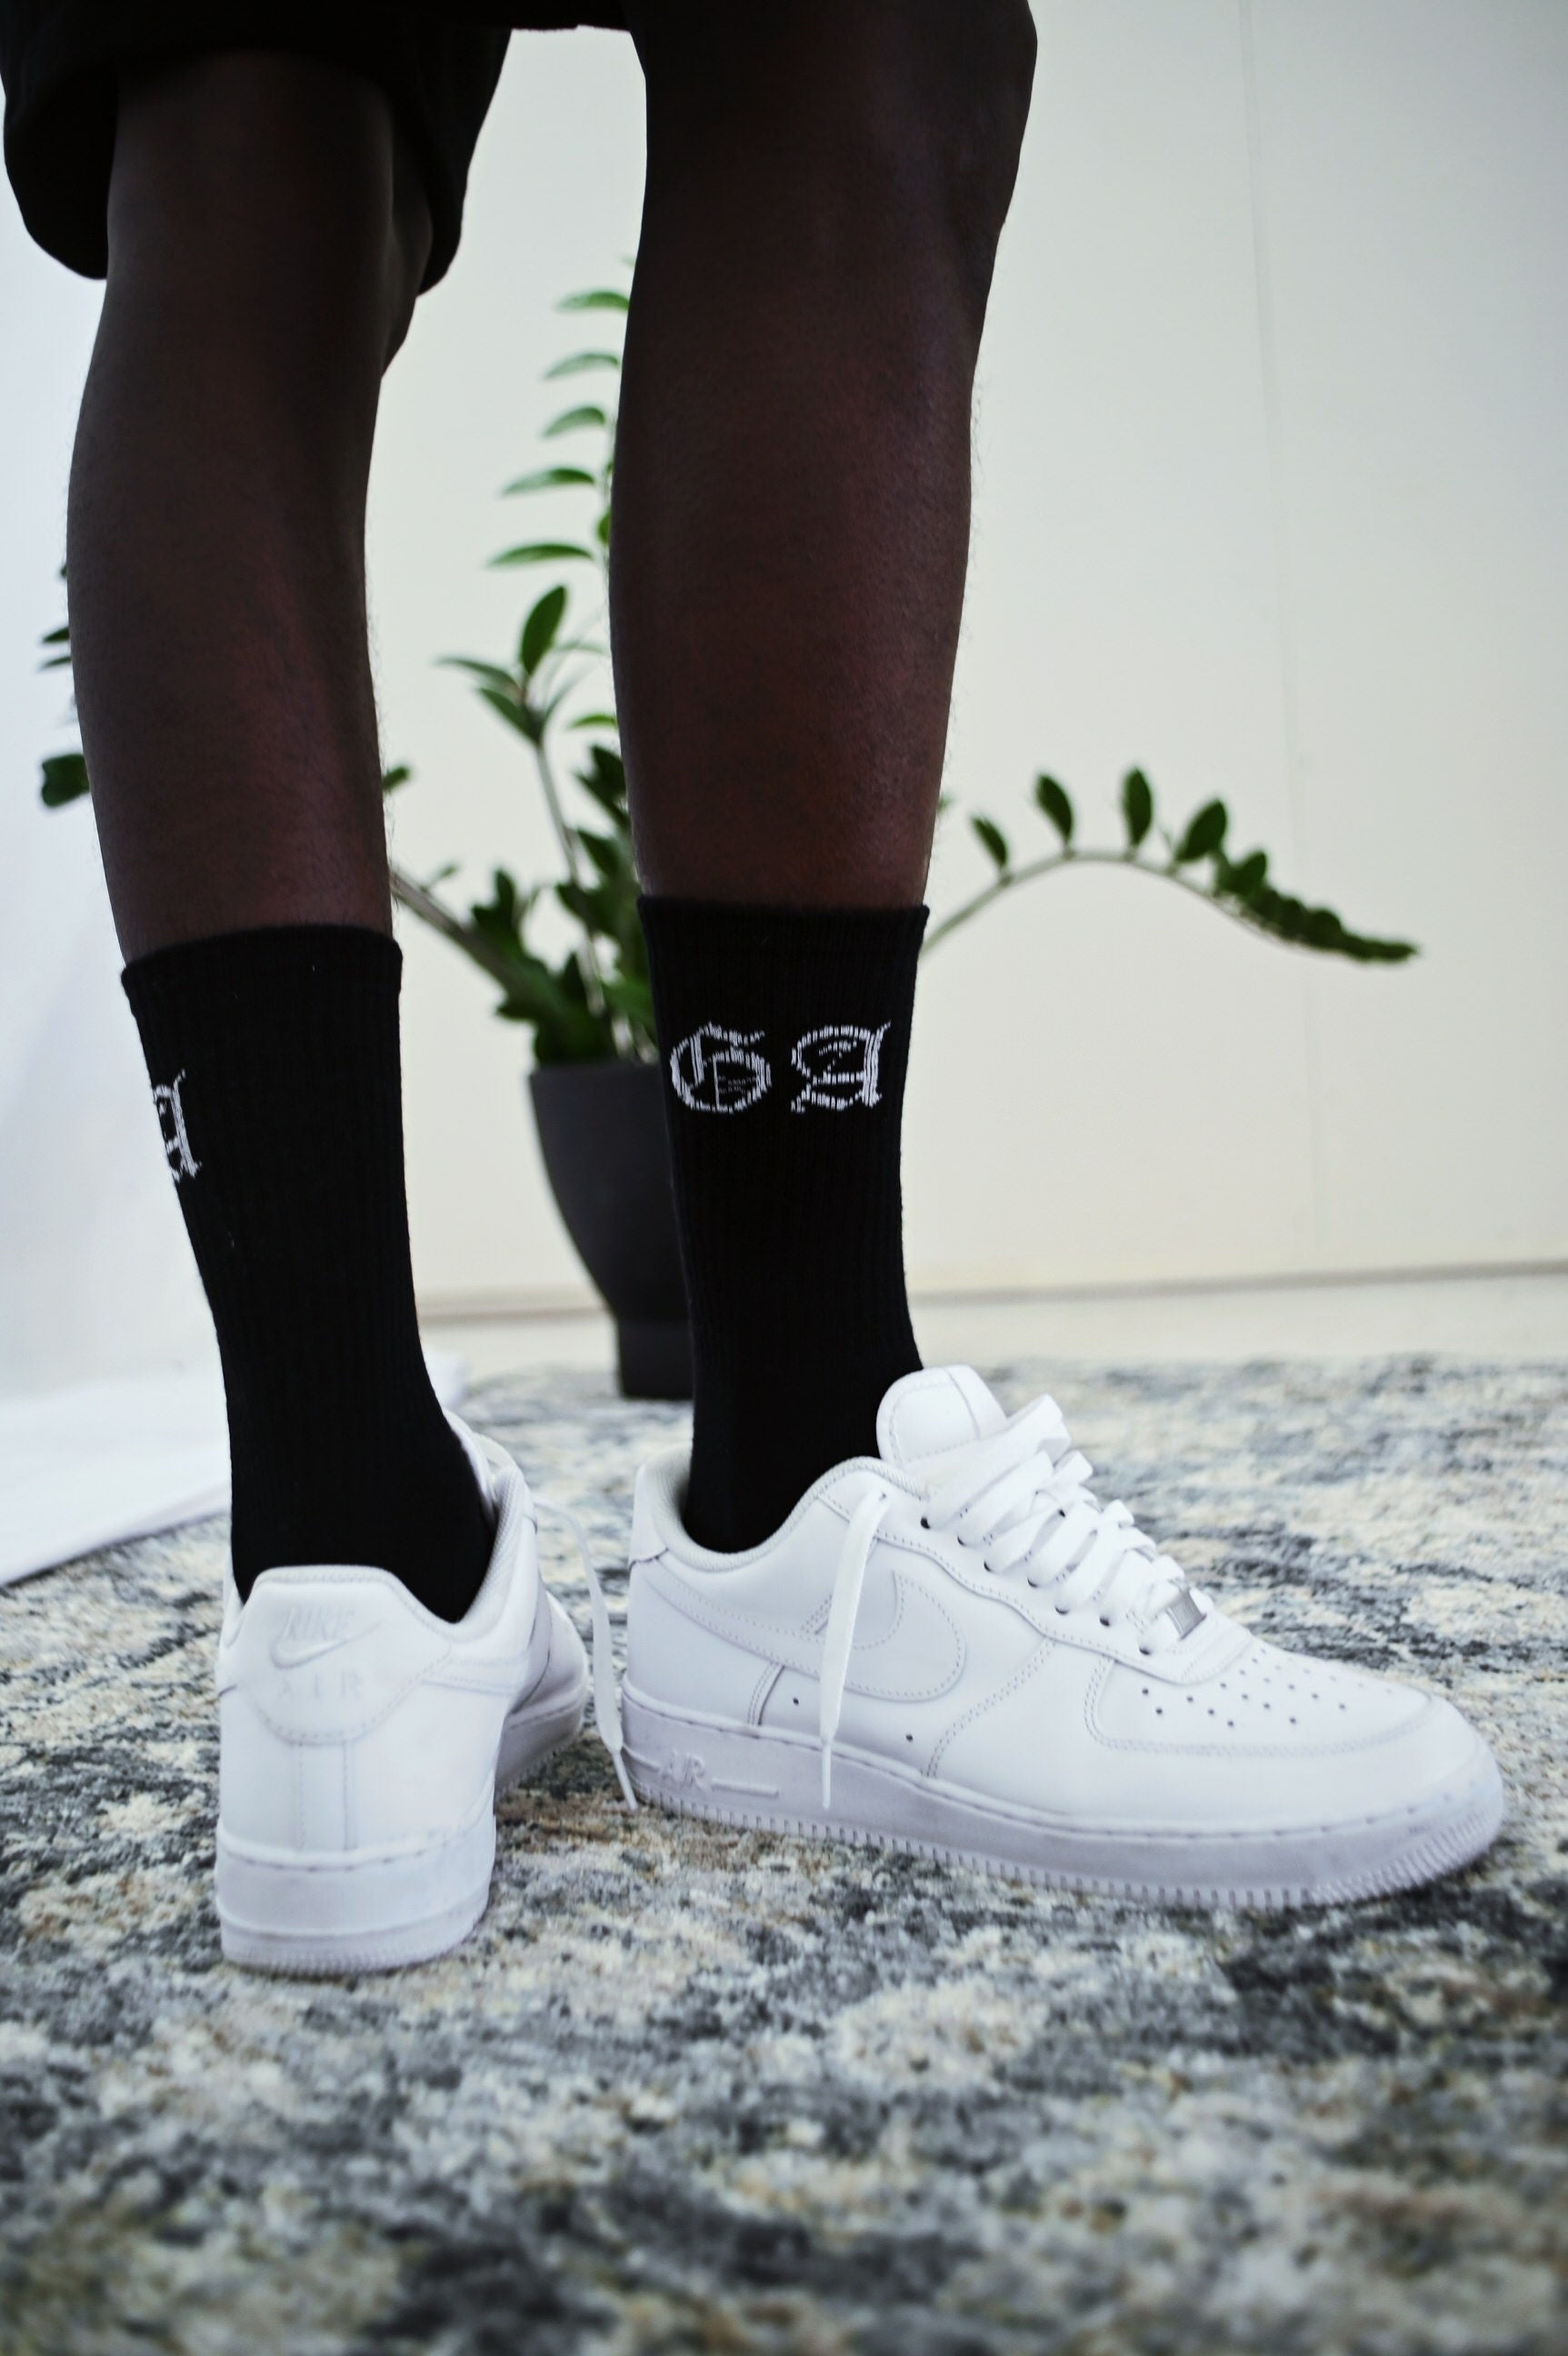 Model wearing a pairs of socks with capital letters GA in black and white